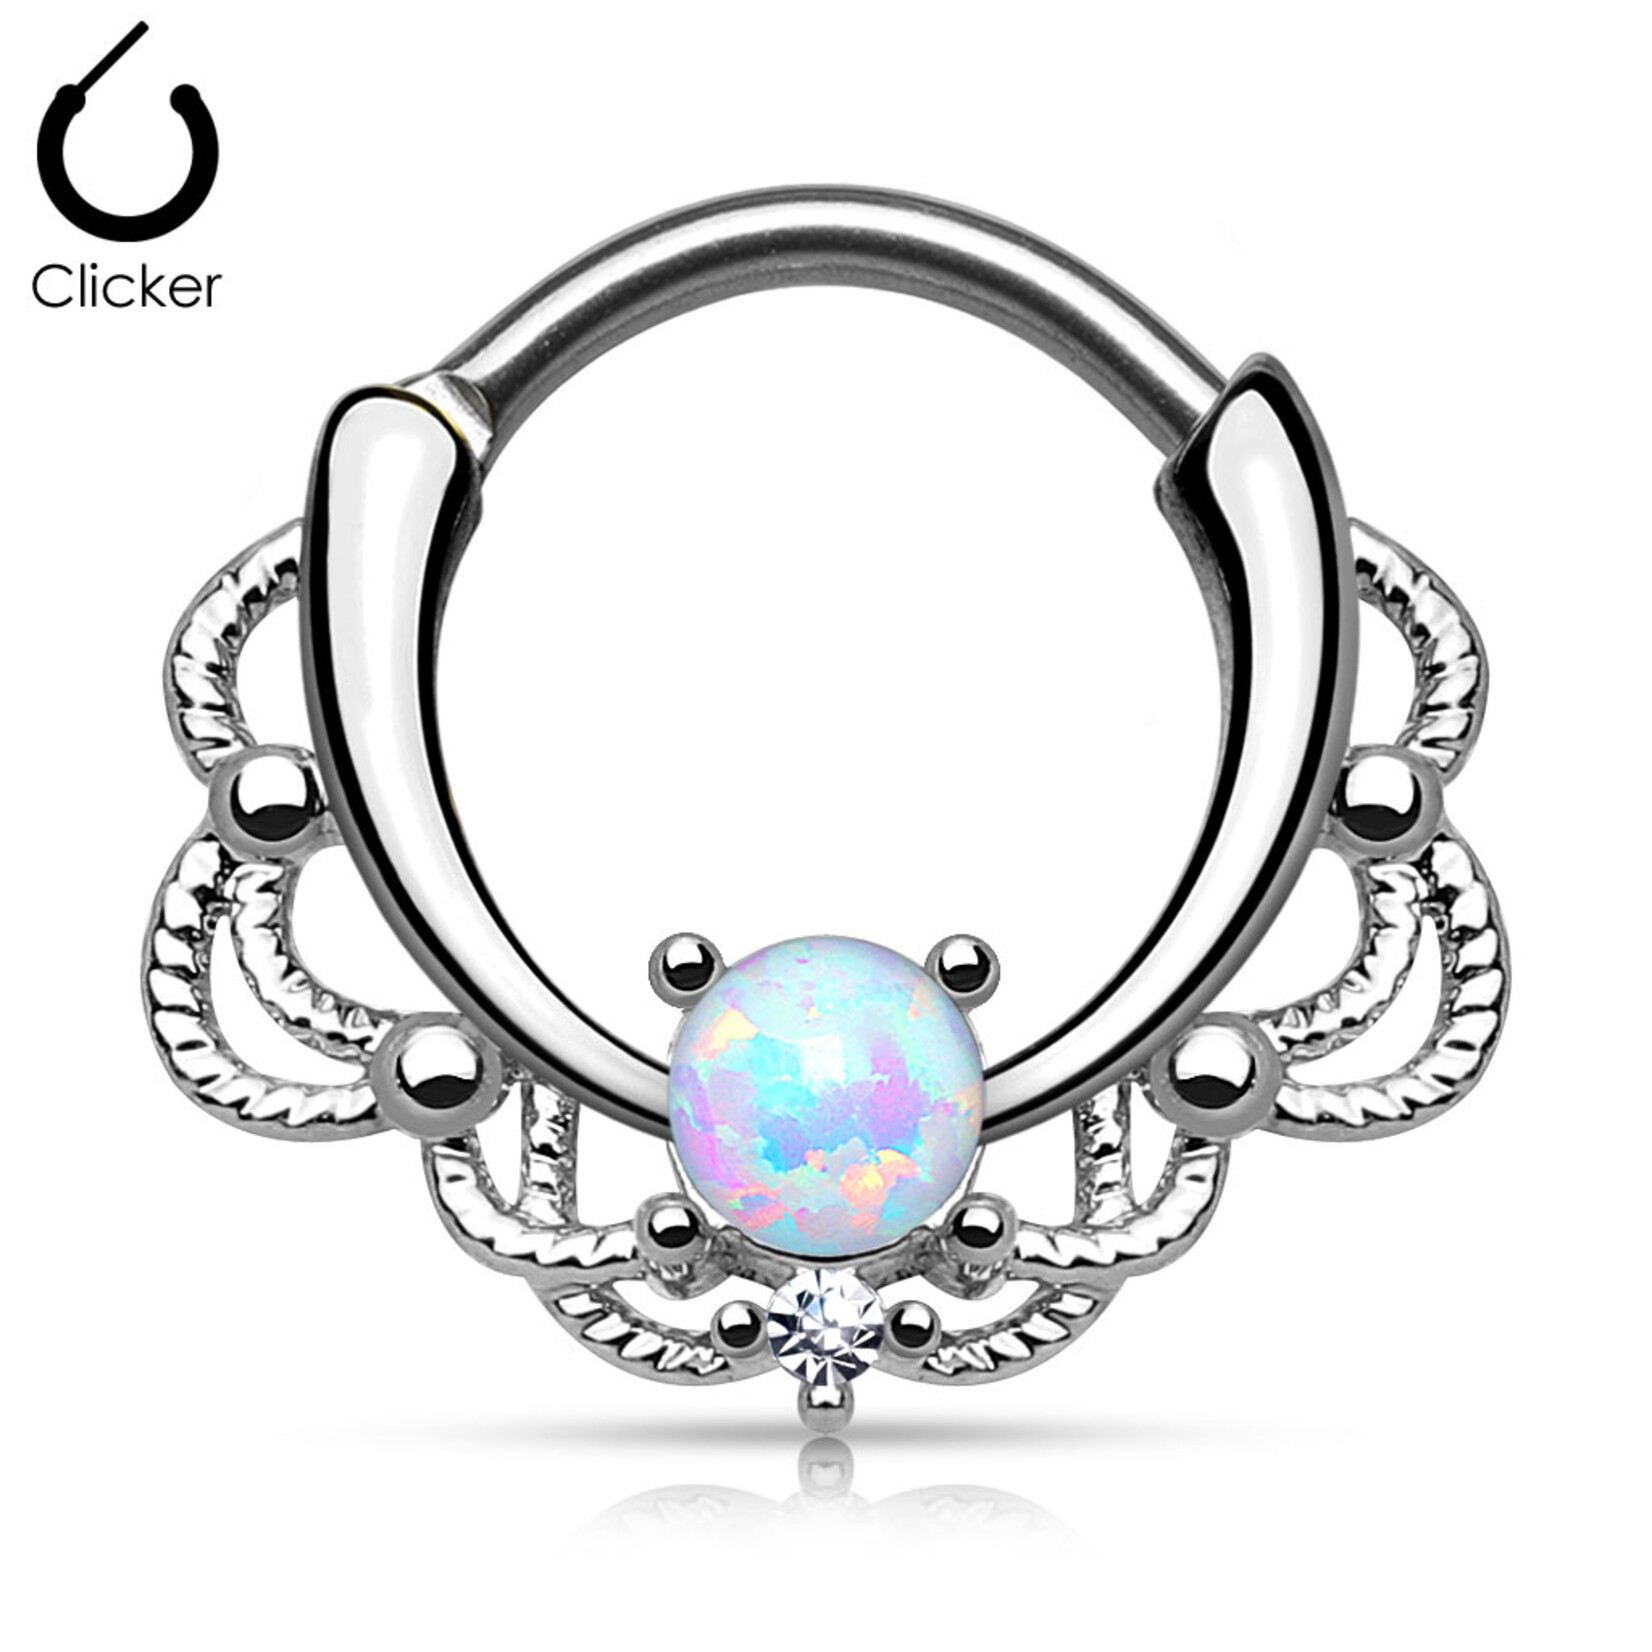 Hollywood Body Jewelry Lacey Opal Clicker